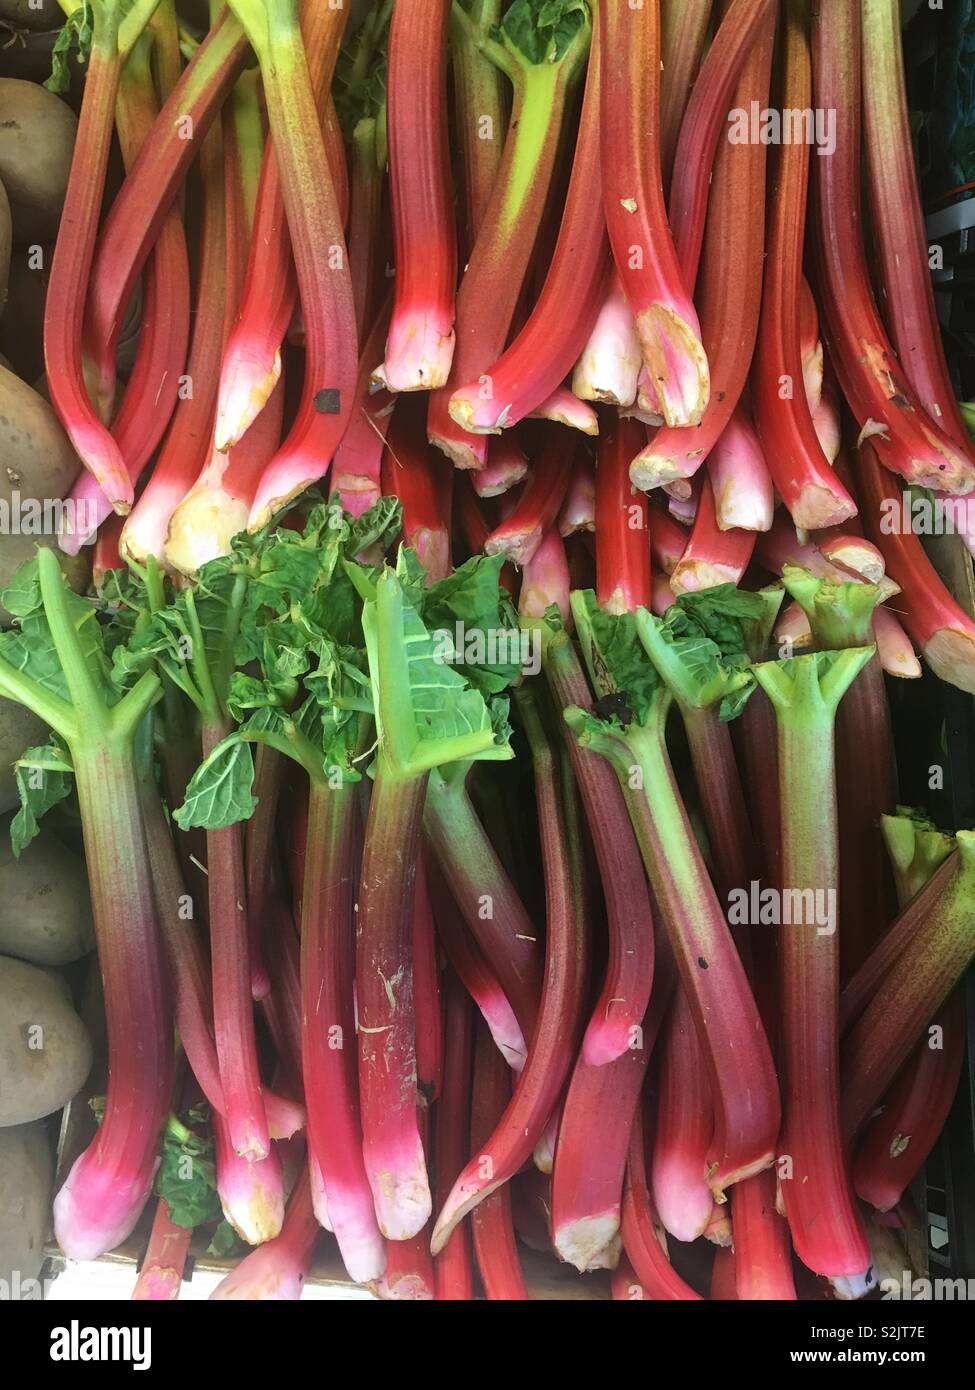 Rhubarb stalks for sale in green grocer Stock Photo